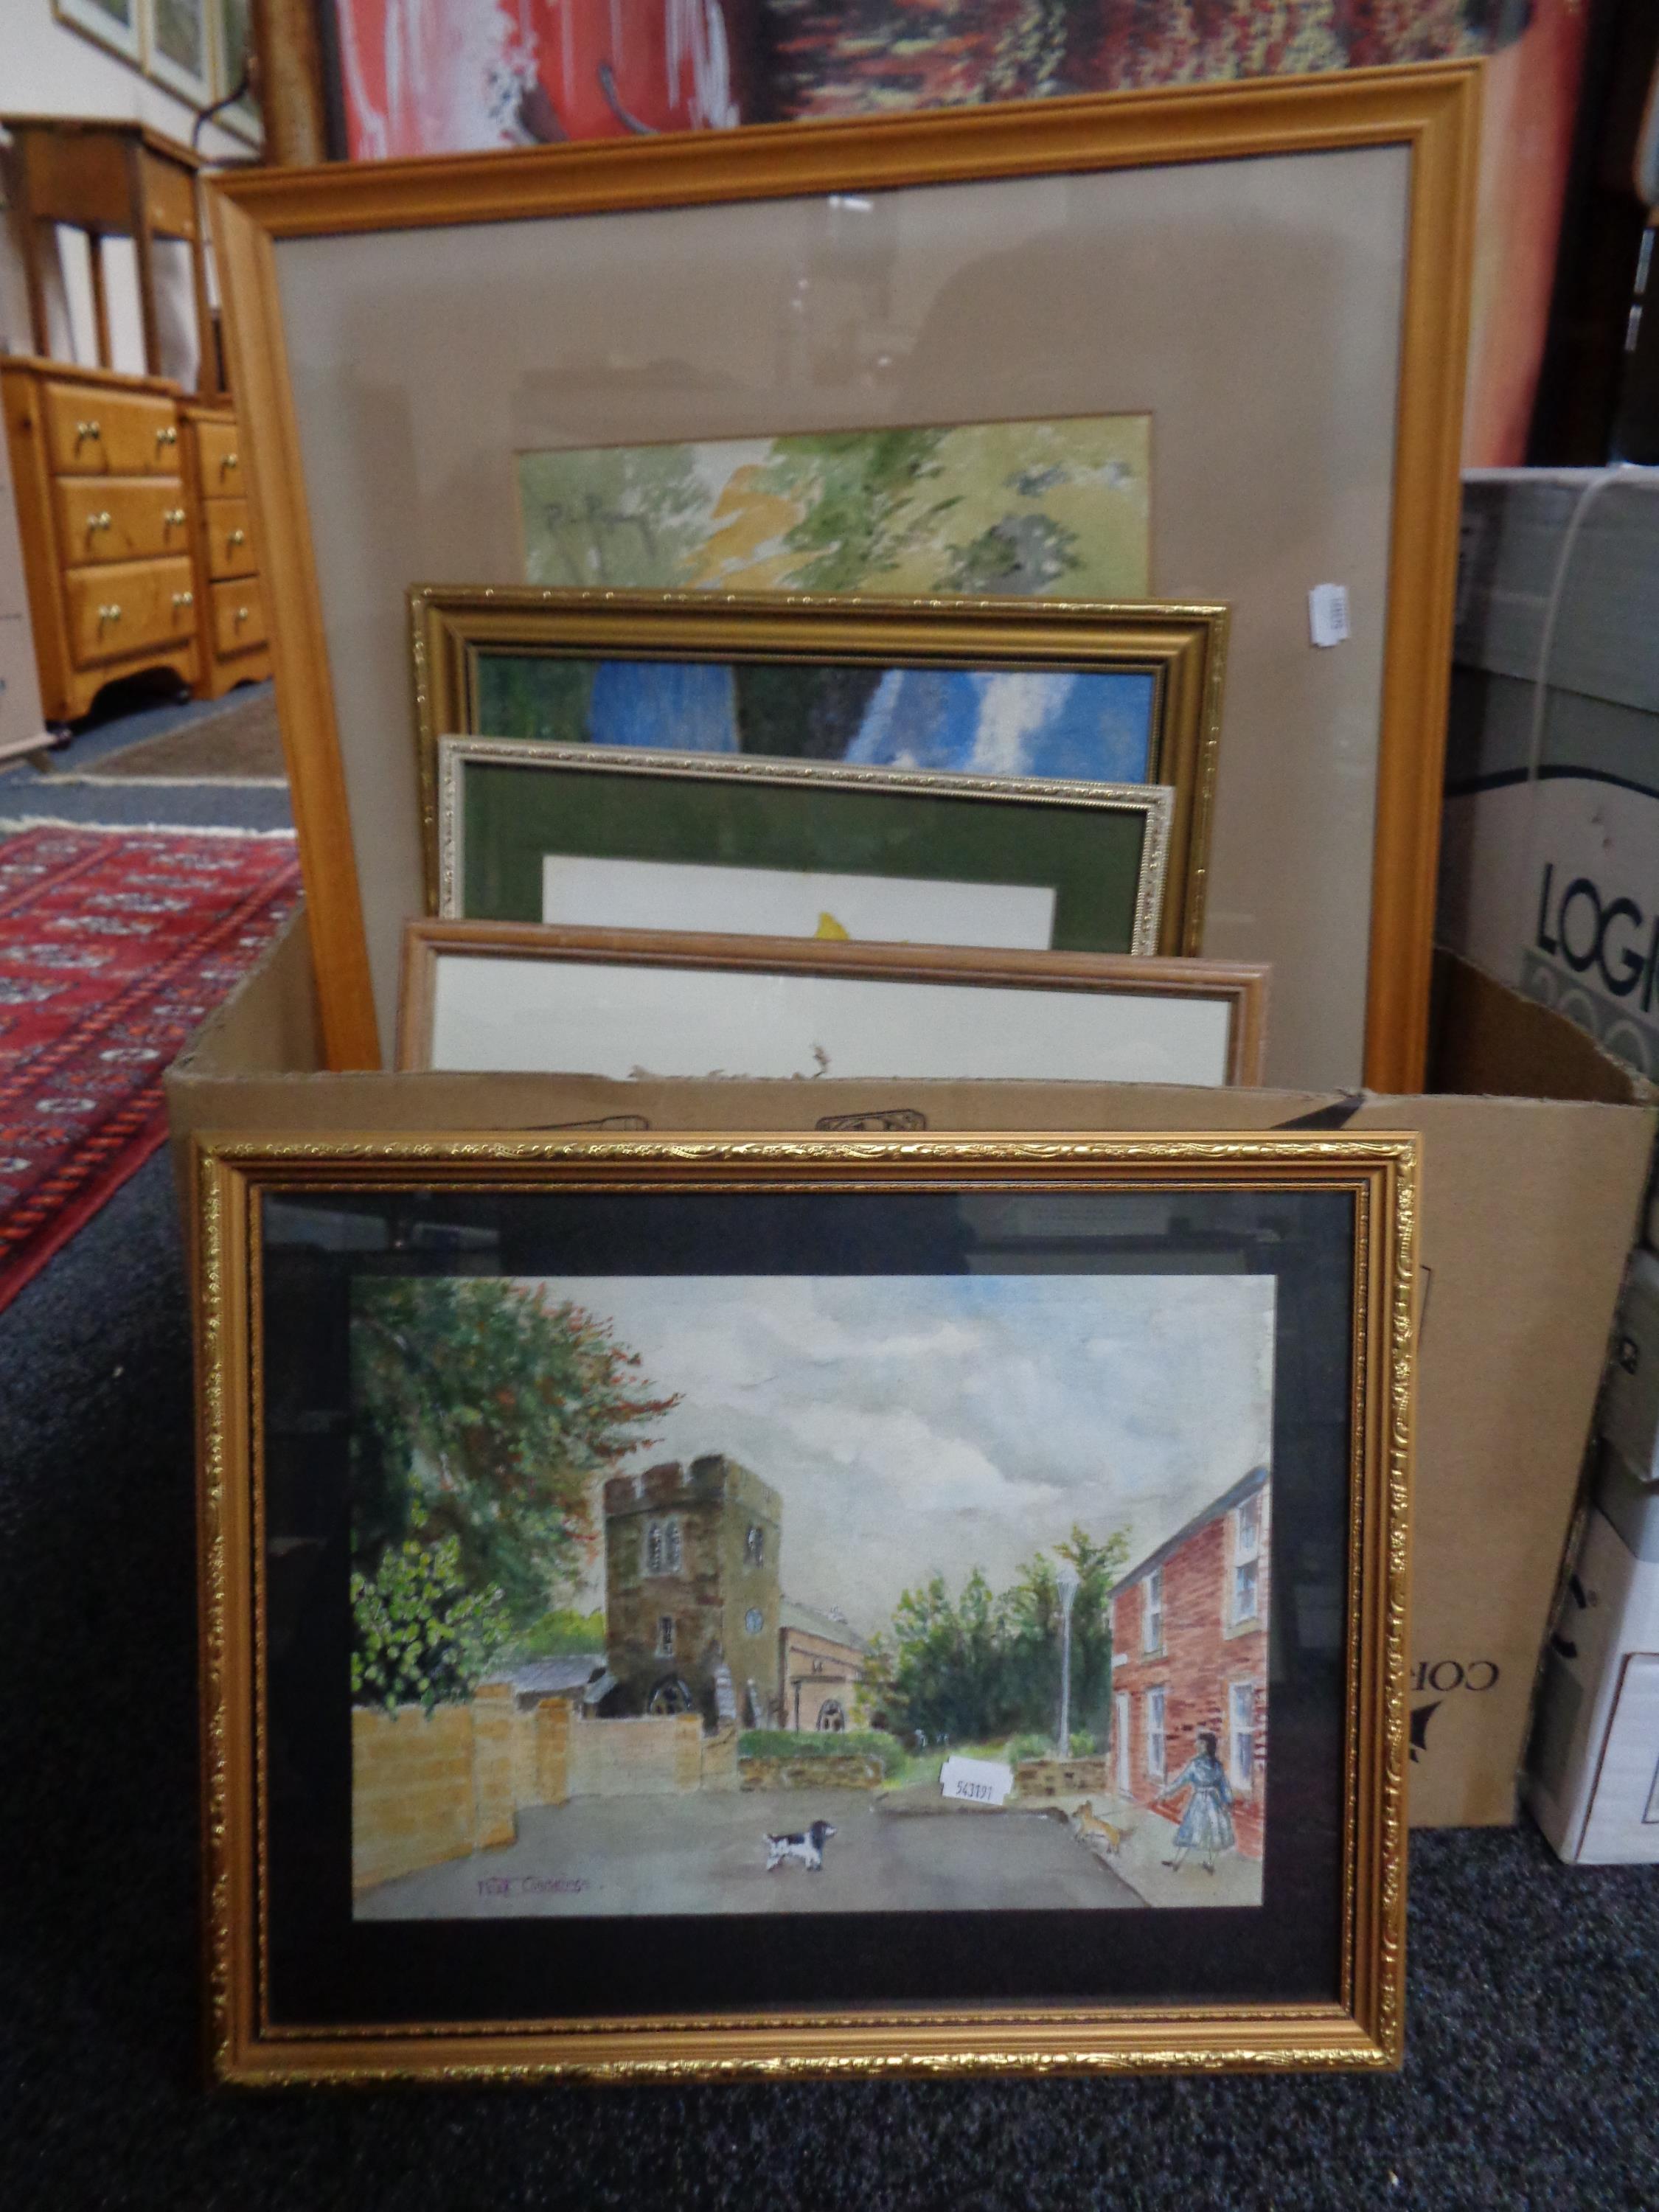 A box of assorted framed pictures and prints - Peter corbridge watercolour of St Marys